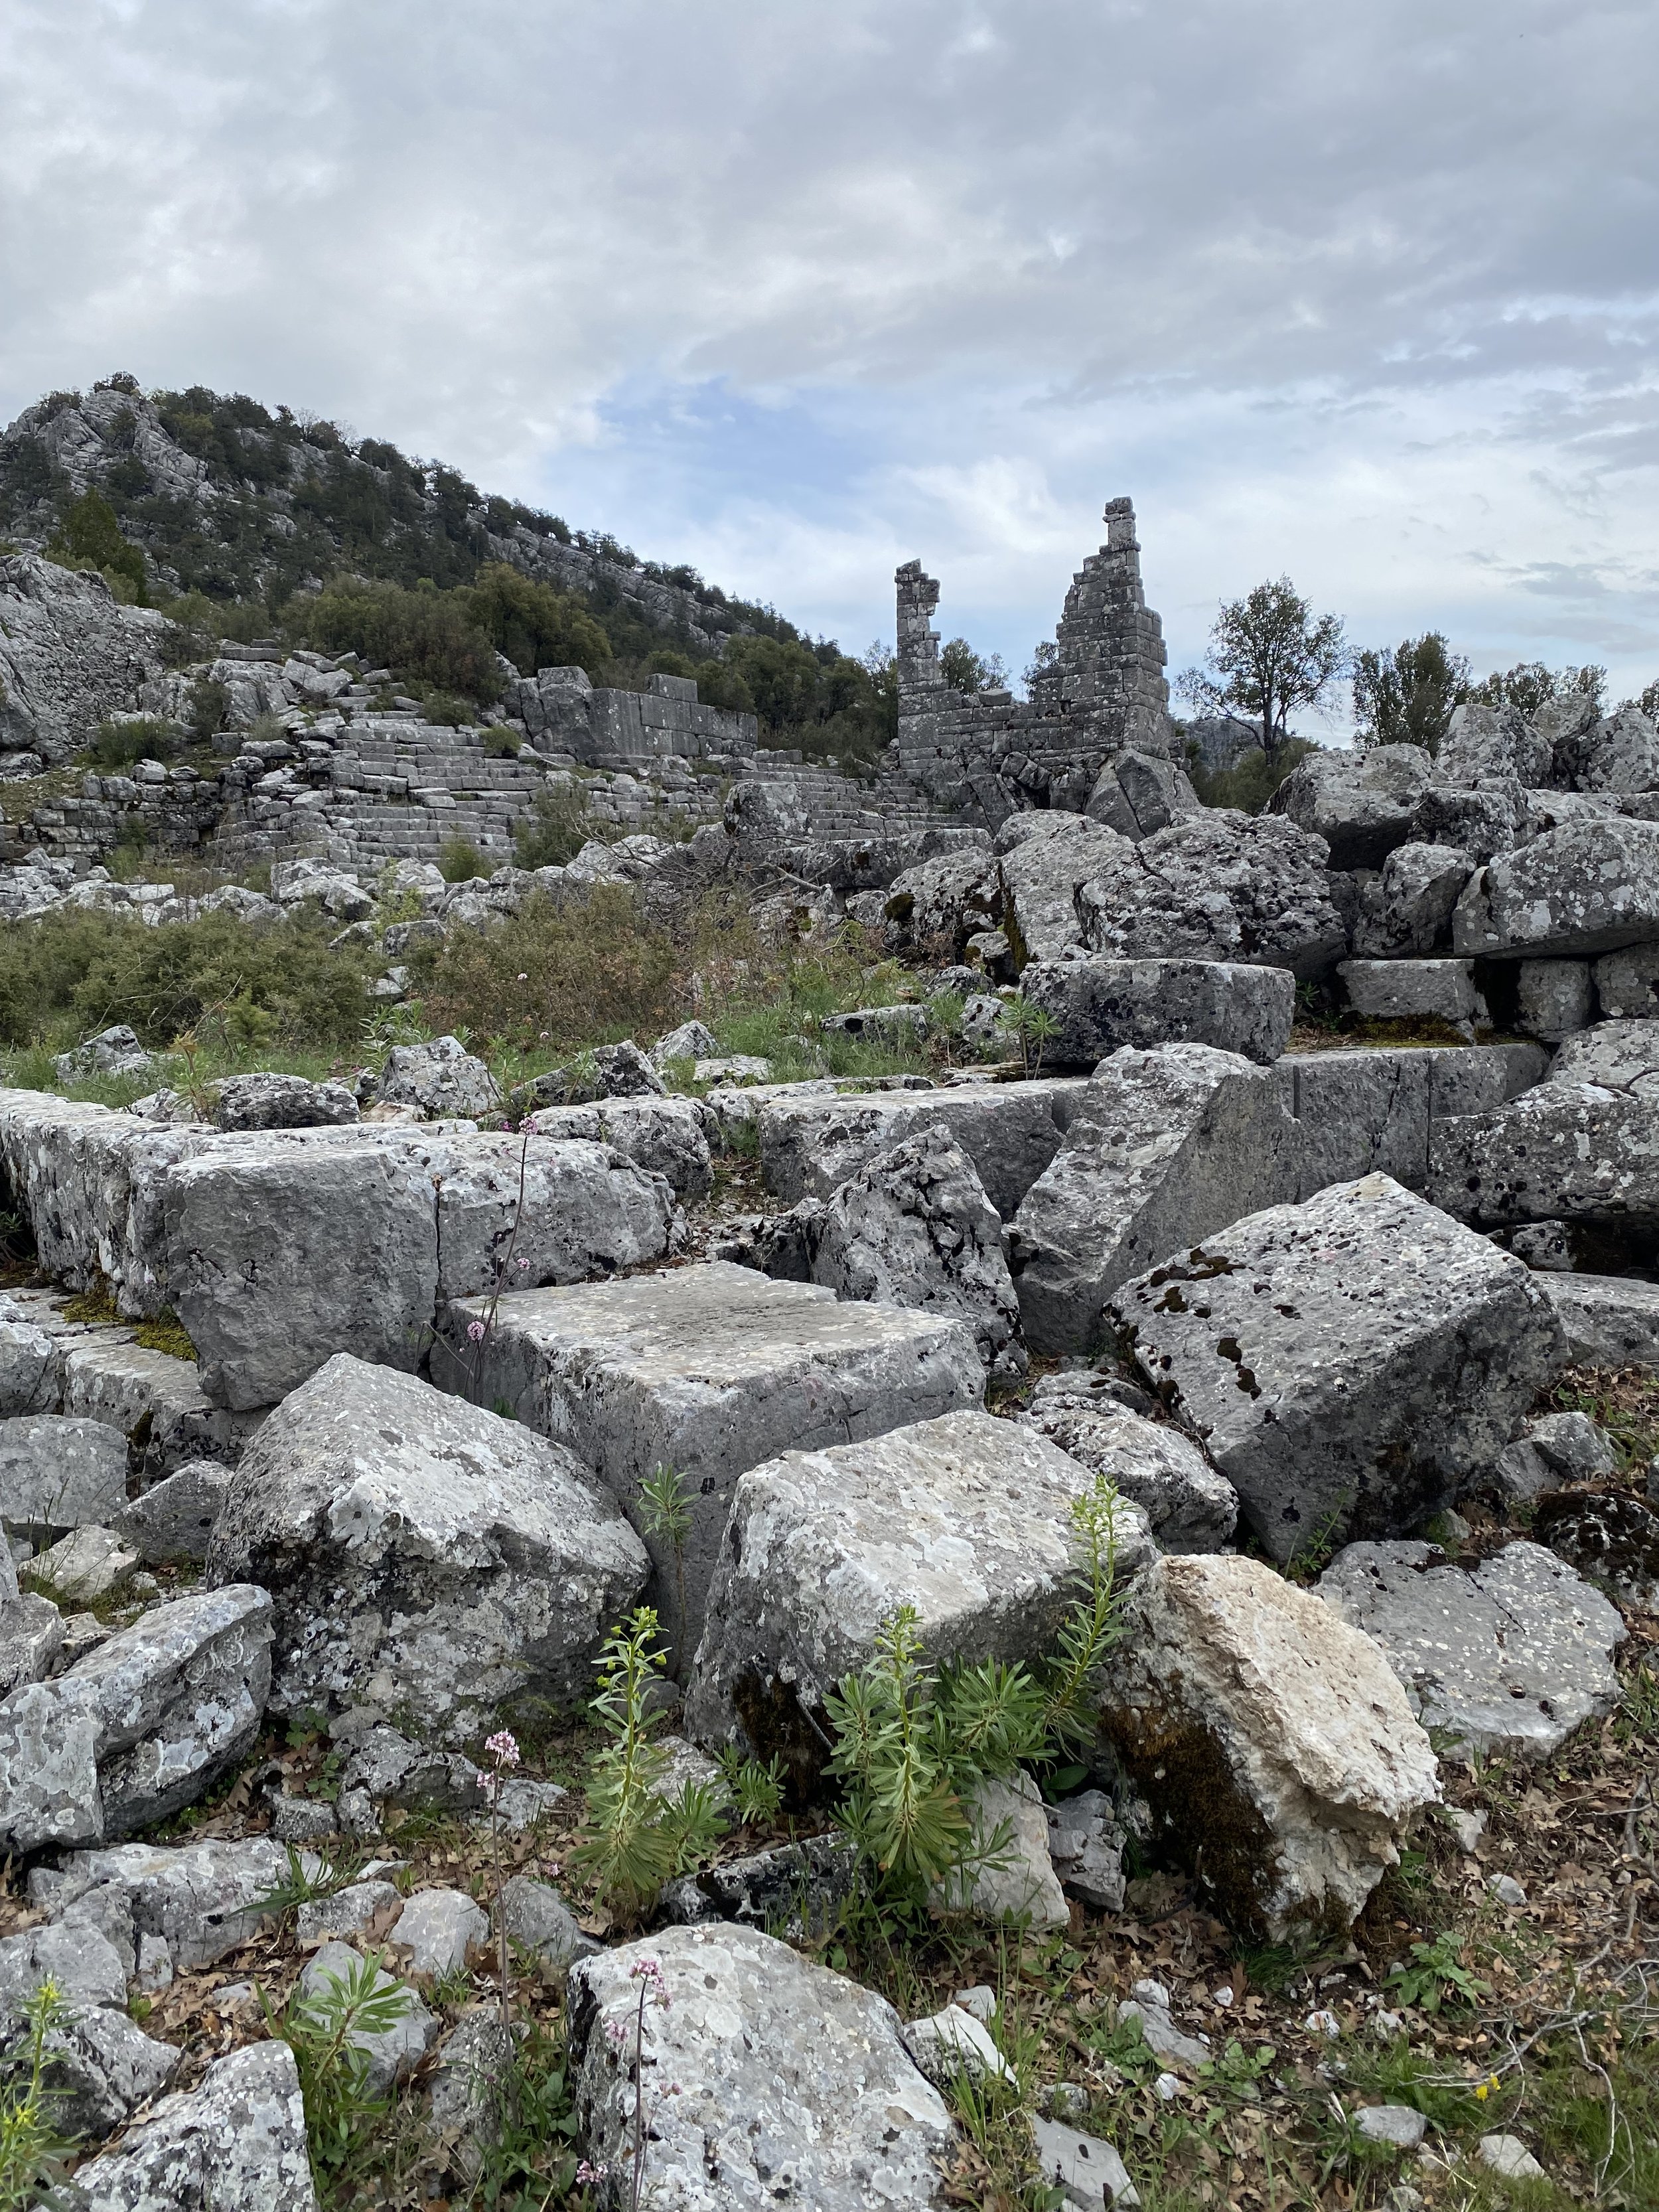  Unexcavated ruins at the city of Adada, along the first century Roman road between Perga and Pisidian Antioch.